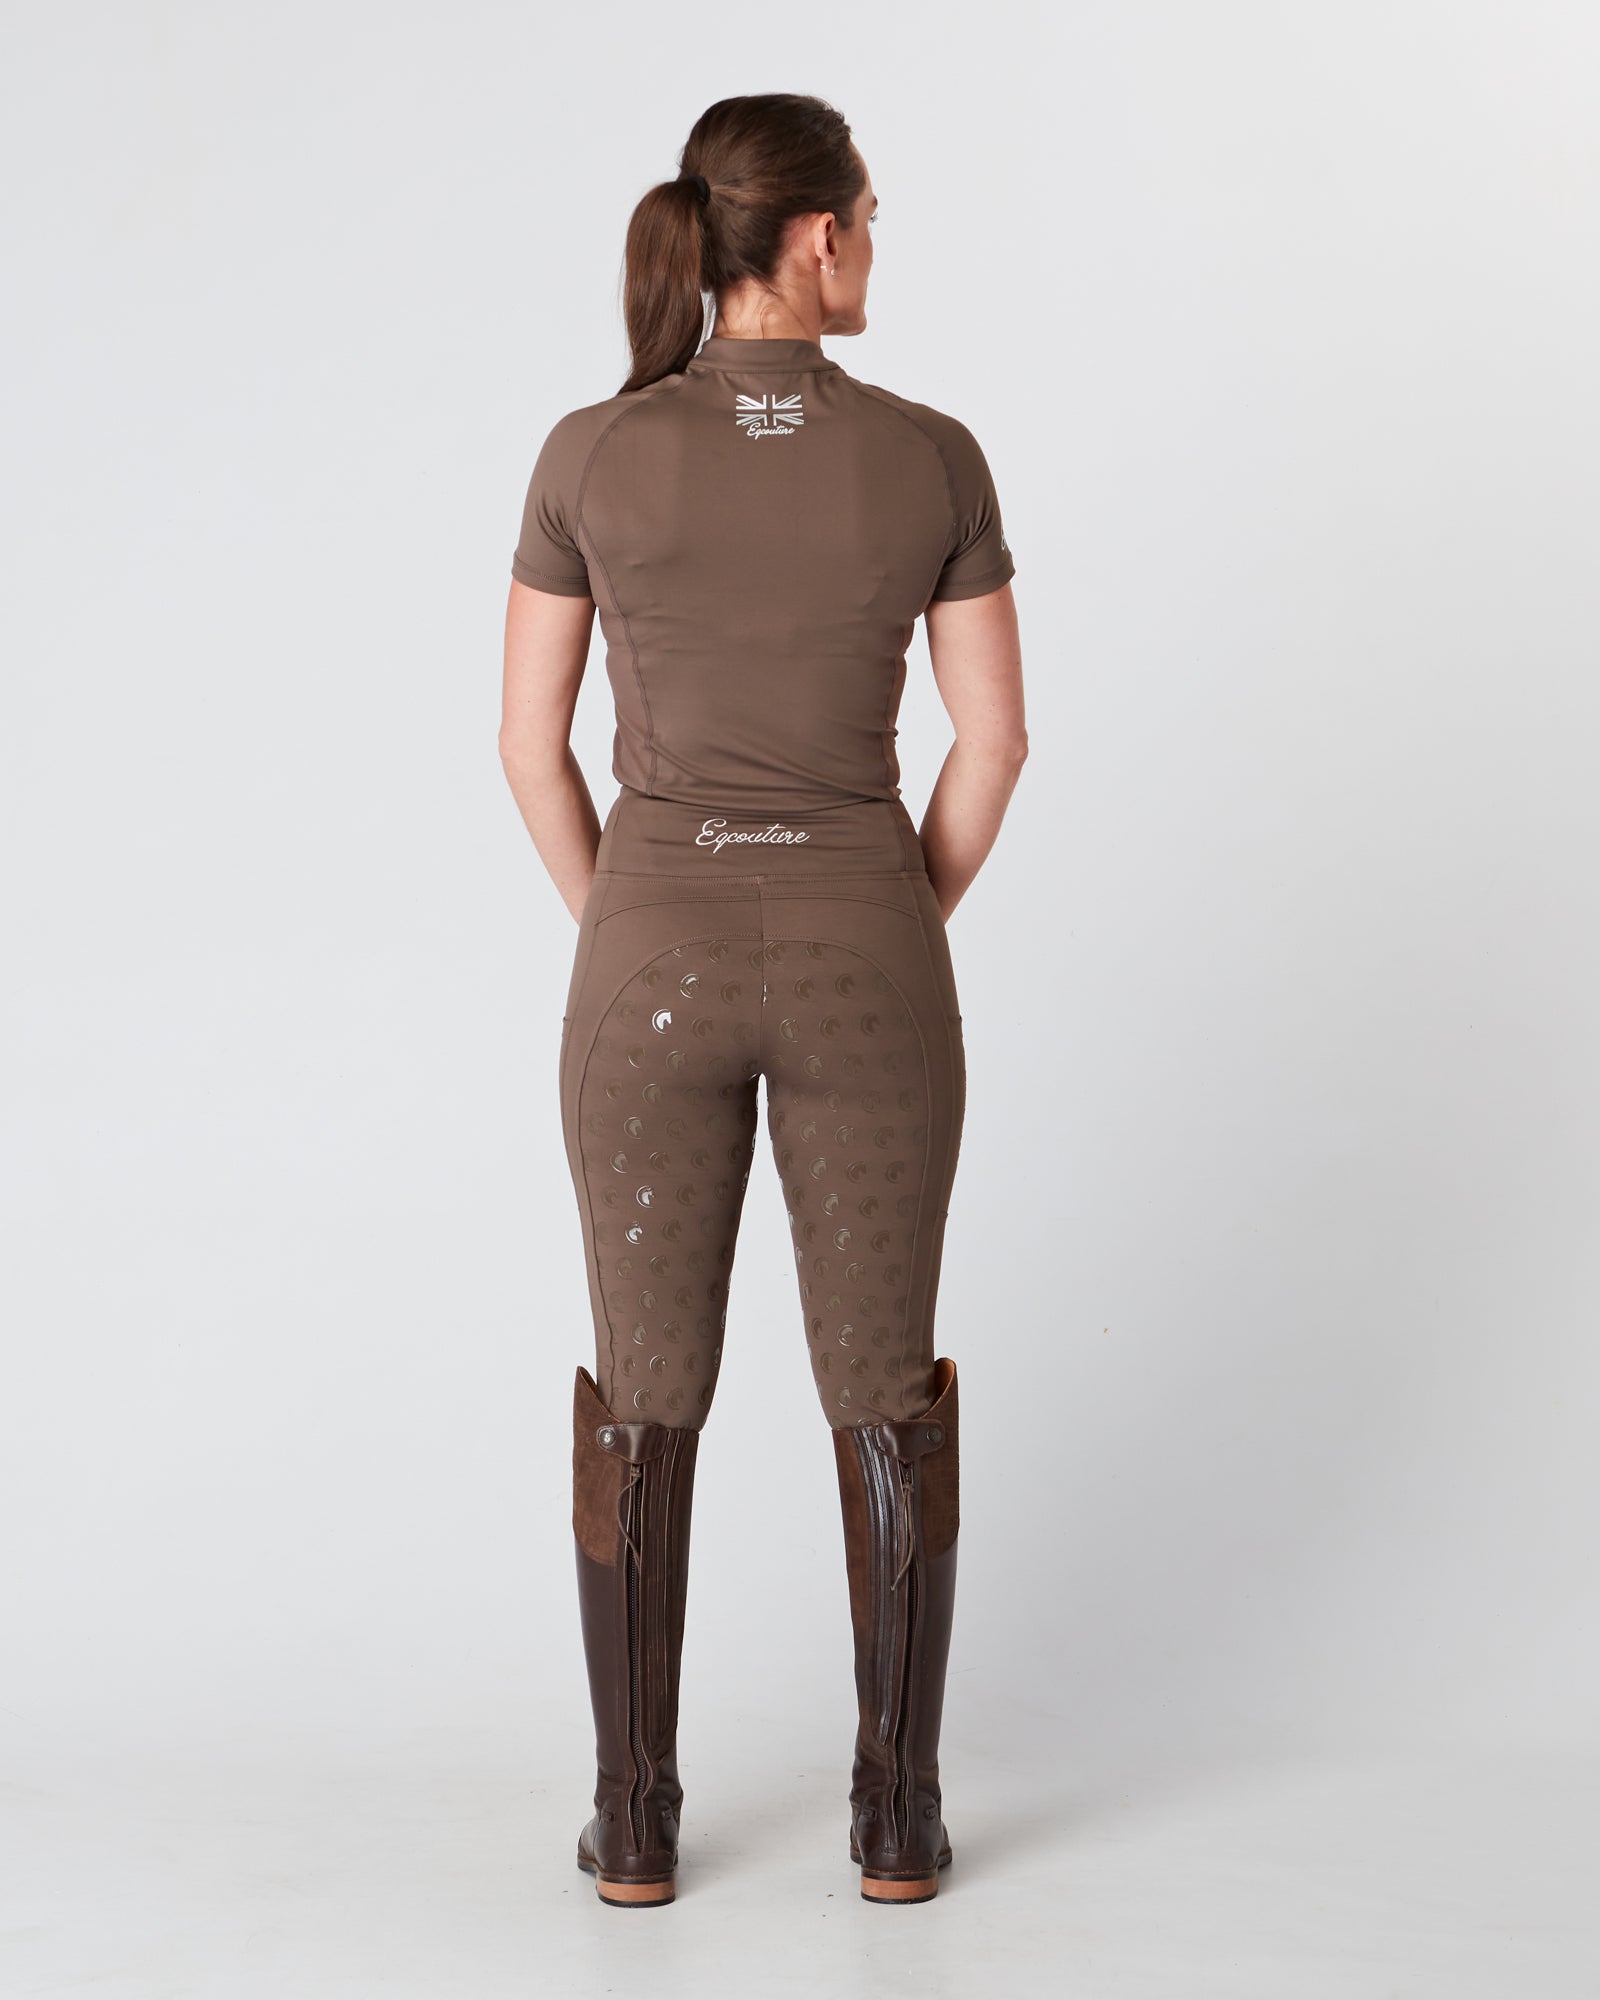 Horse Riding Leggings tights with phone pockets & full seat grip - brown - Eqcouture